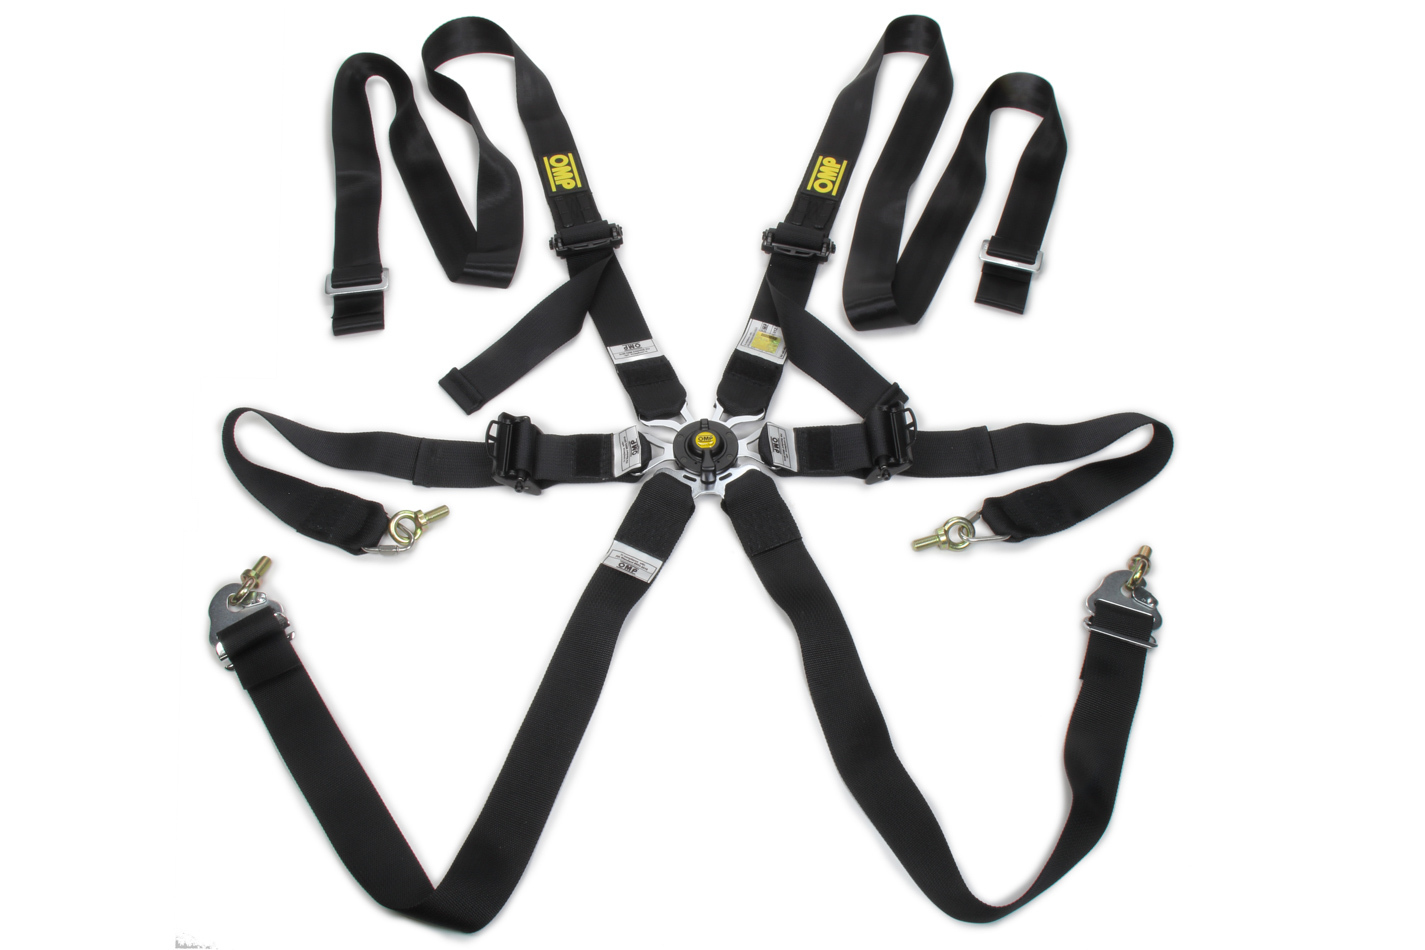 OMP Racing DA0202HSL071 - Harness, 0202 HSL, 6 Point, Camlock, FIA Approved, Pull Down Adjust, Clip-In / Wrap Around, Individual Harness, Black, Kit